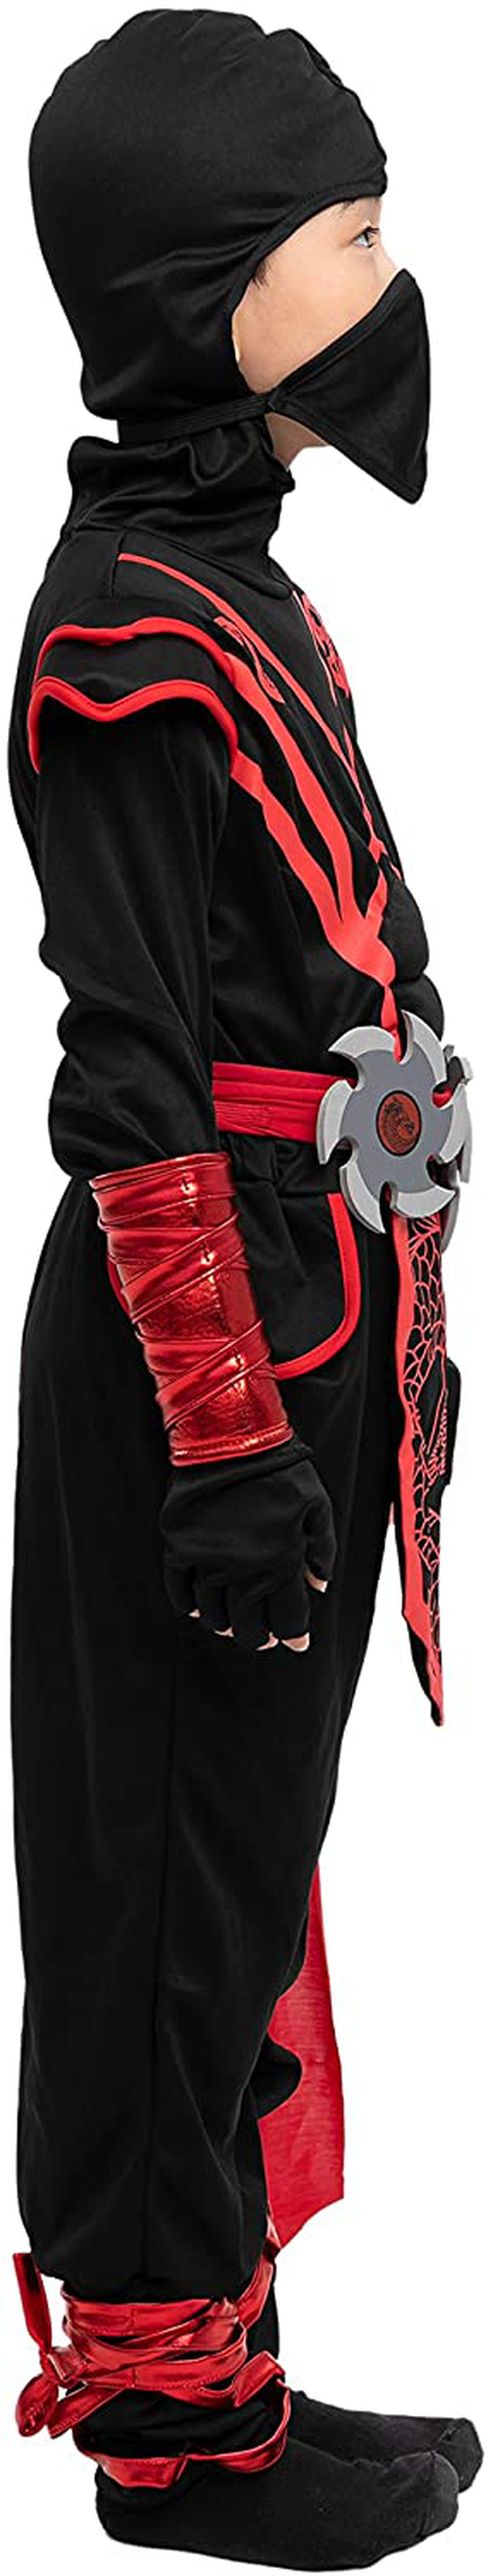 Ninja Dragon Red Costume Outfit Set for kids Halloween Dress Up Party